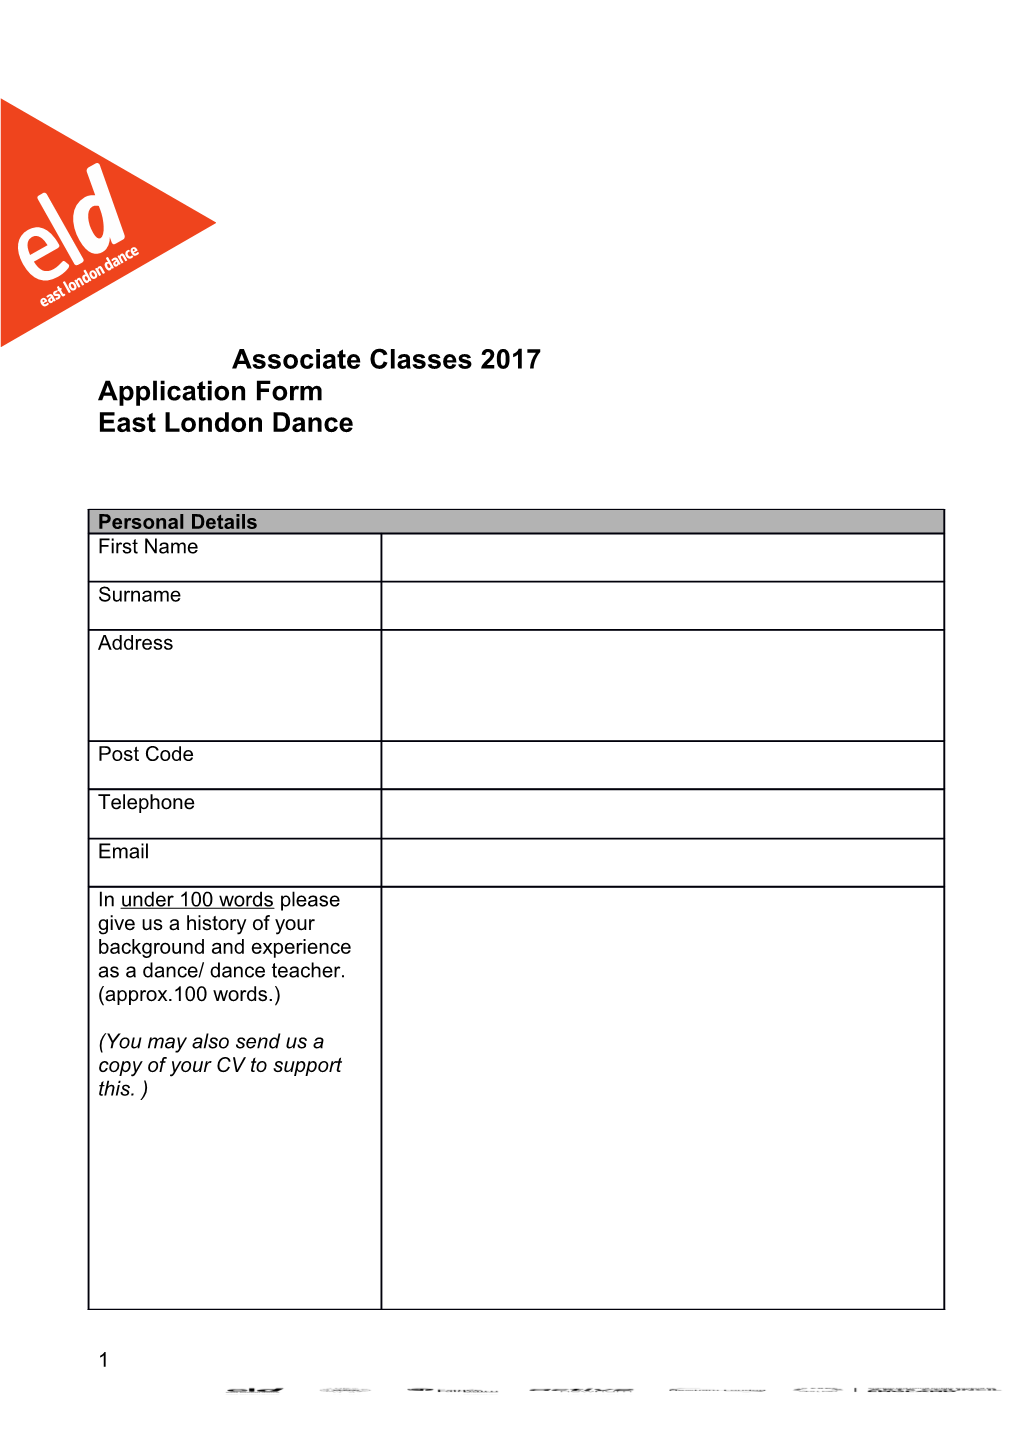 Please Complete This Application Form and Return To